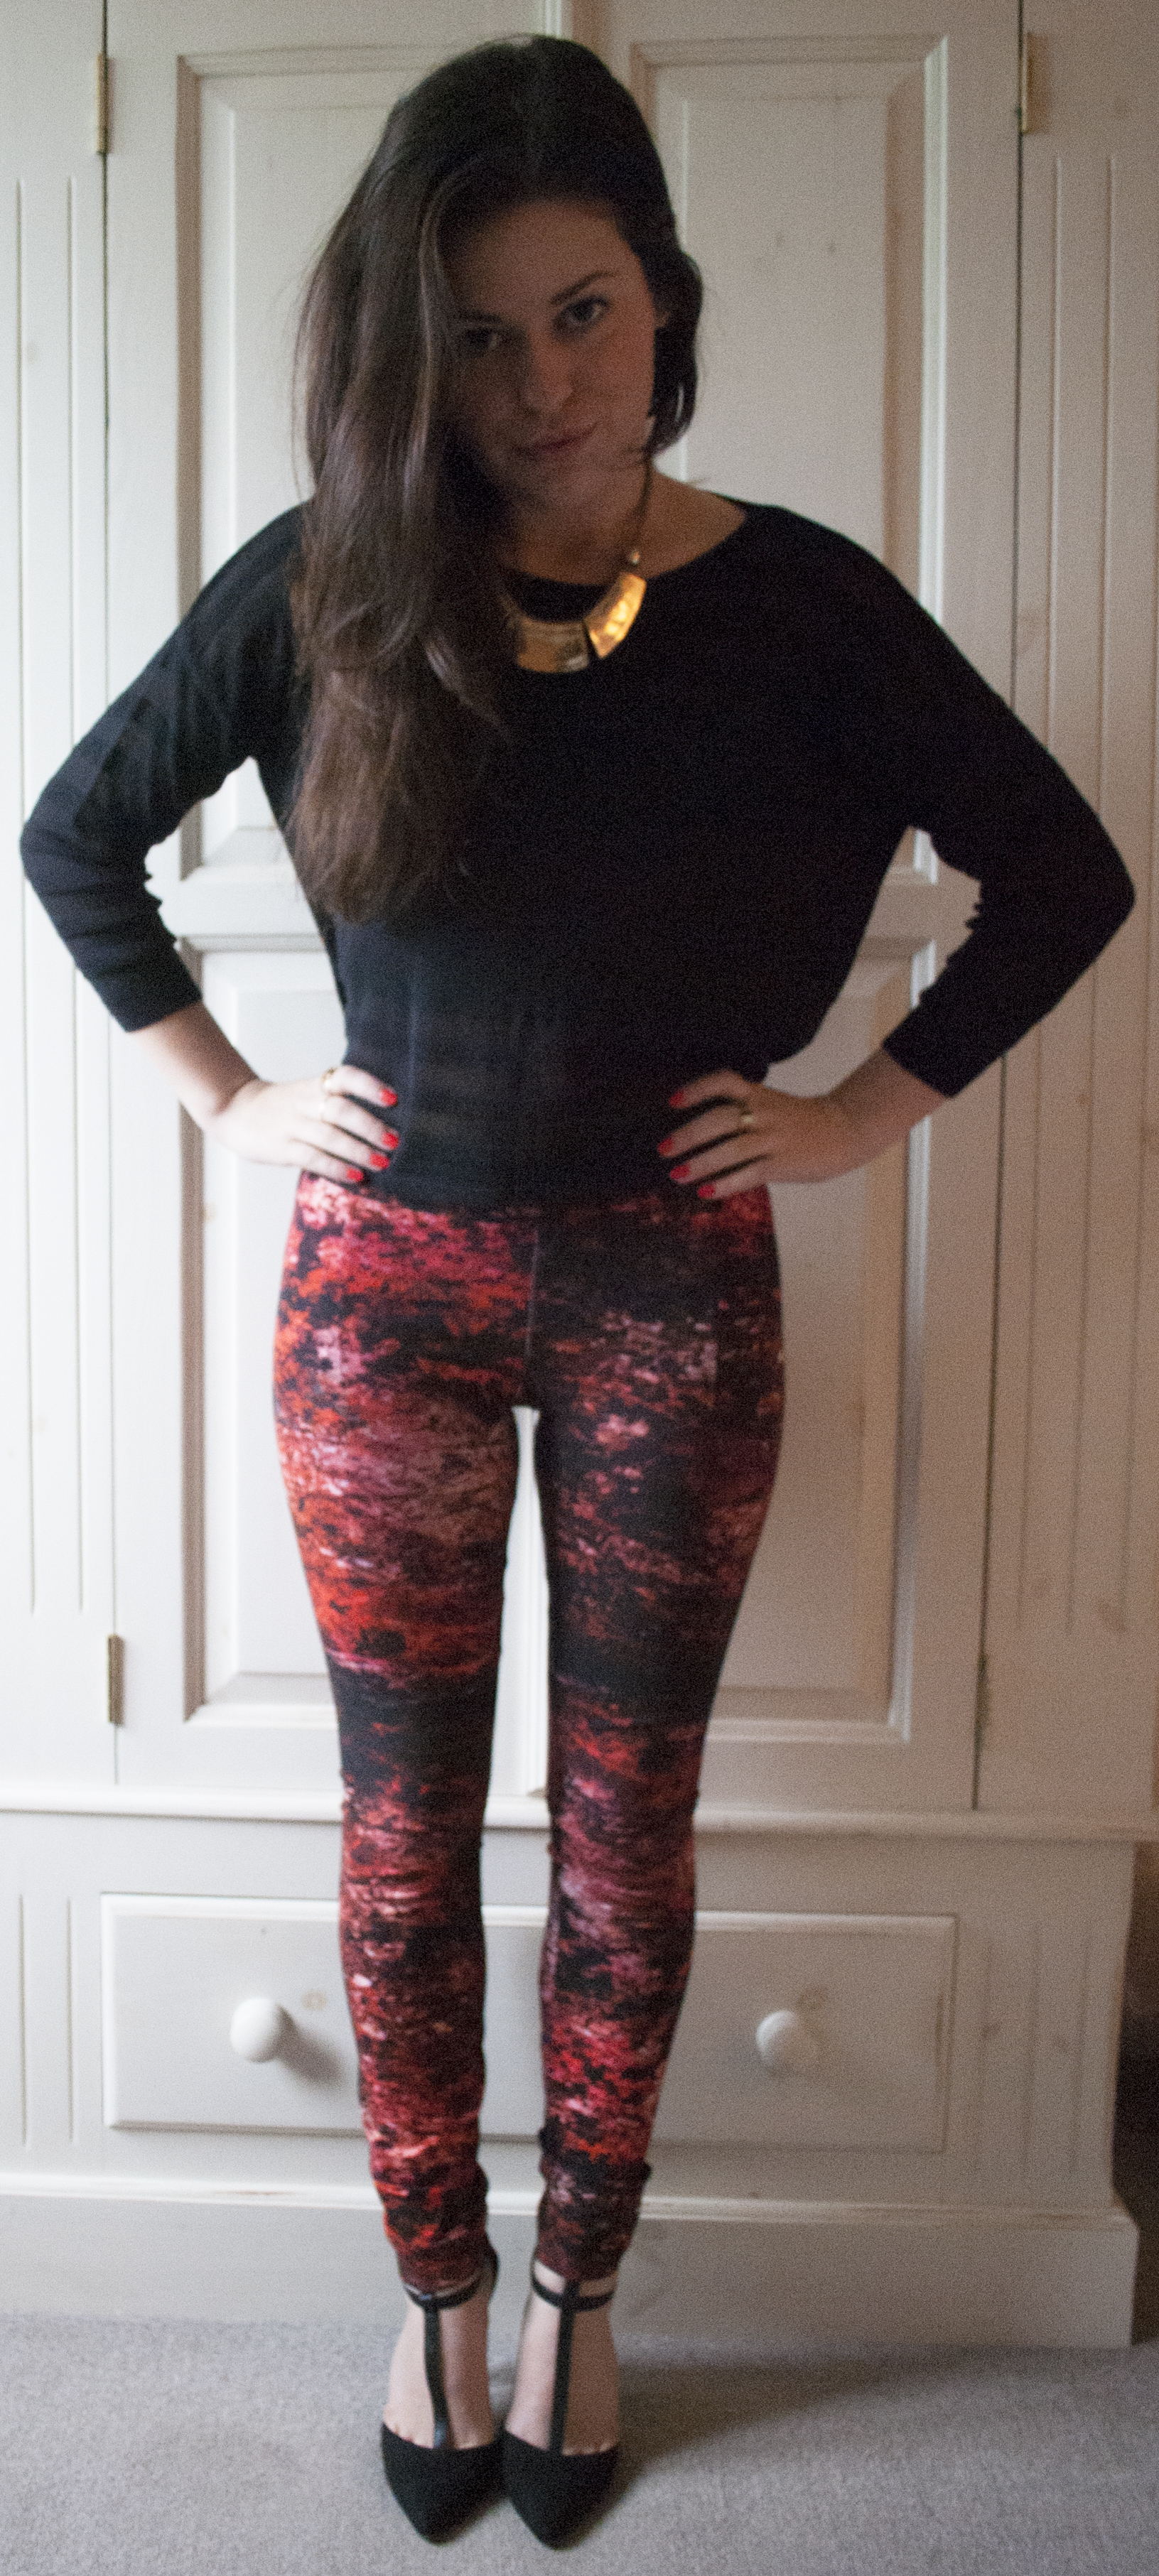 Wardrobe Staple – Patterned Leggings (and a little Lang)